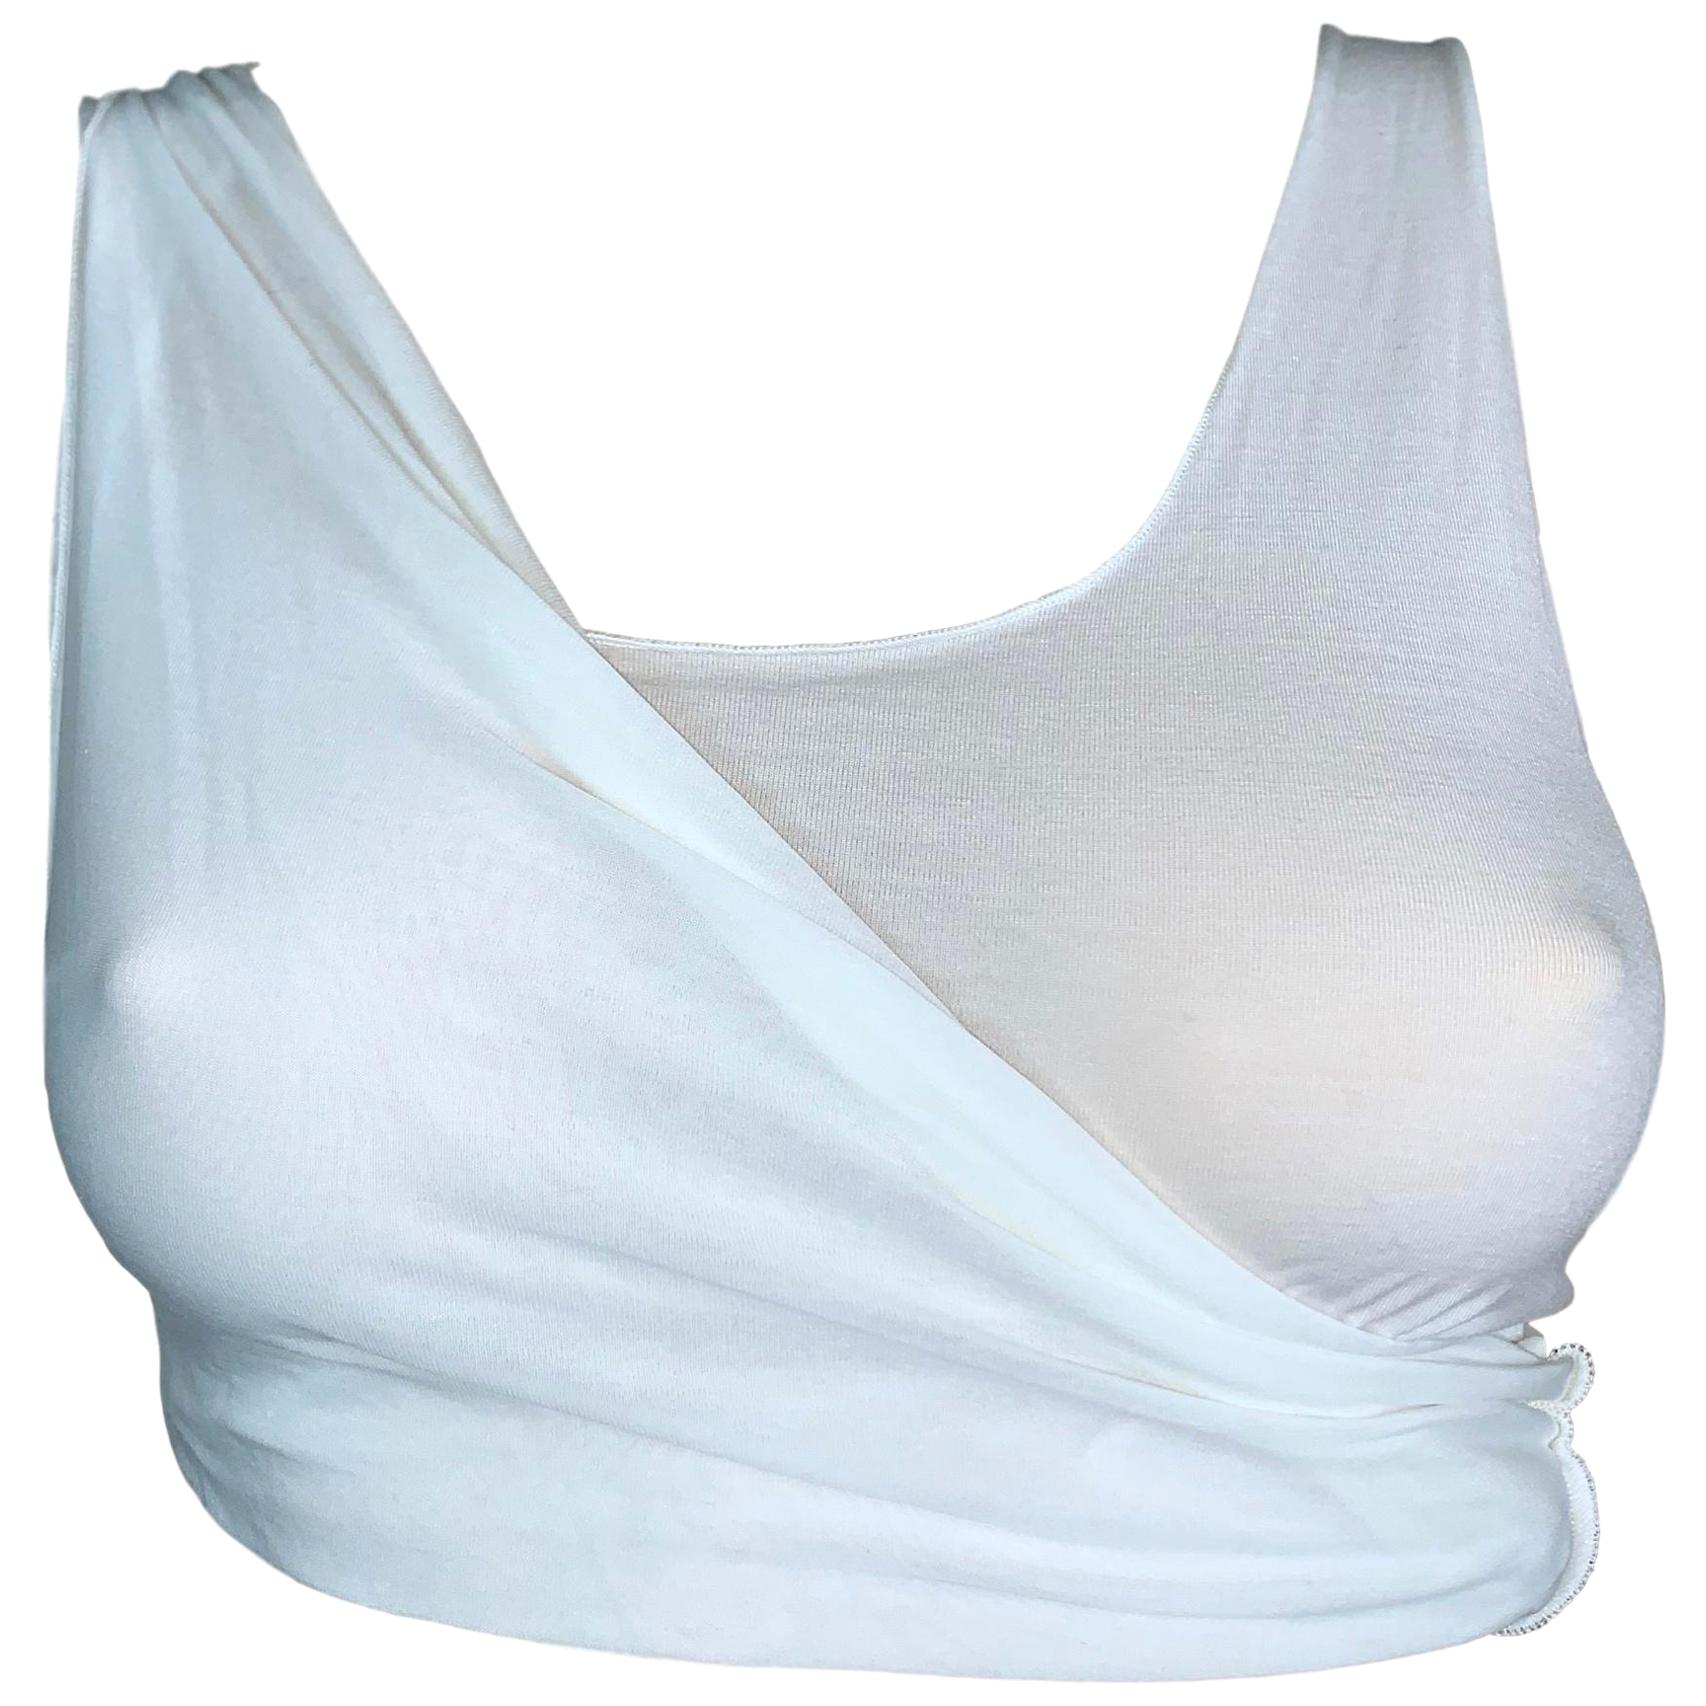 S/S 2001 Gucci by Tom Ford Sheer White Cut-Out Crop Tank Top